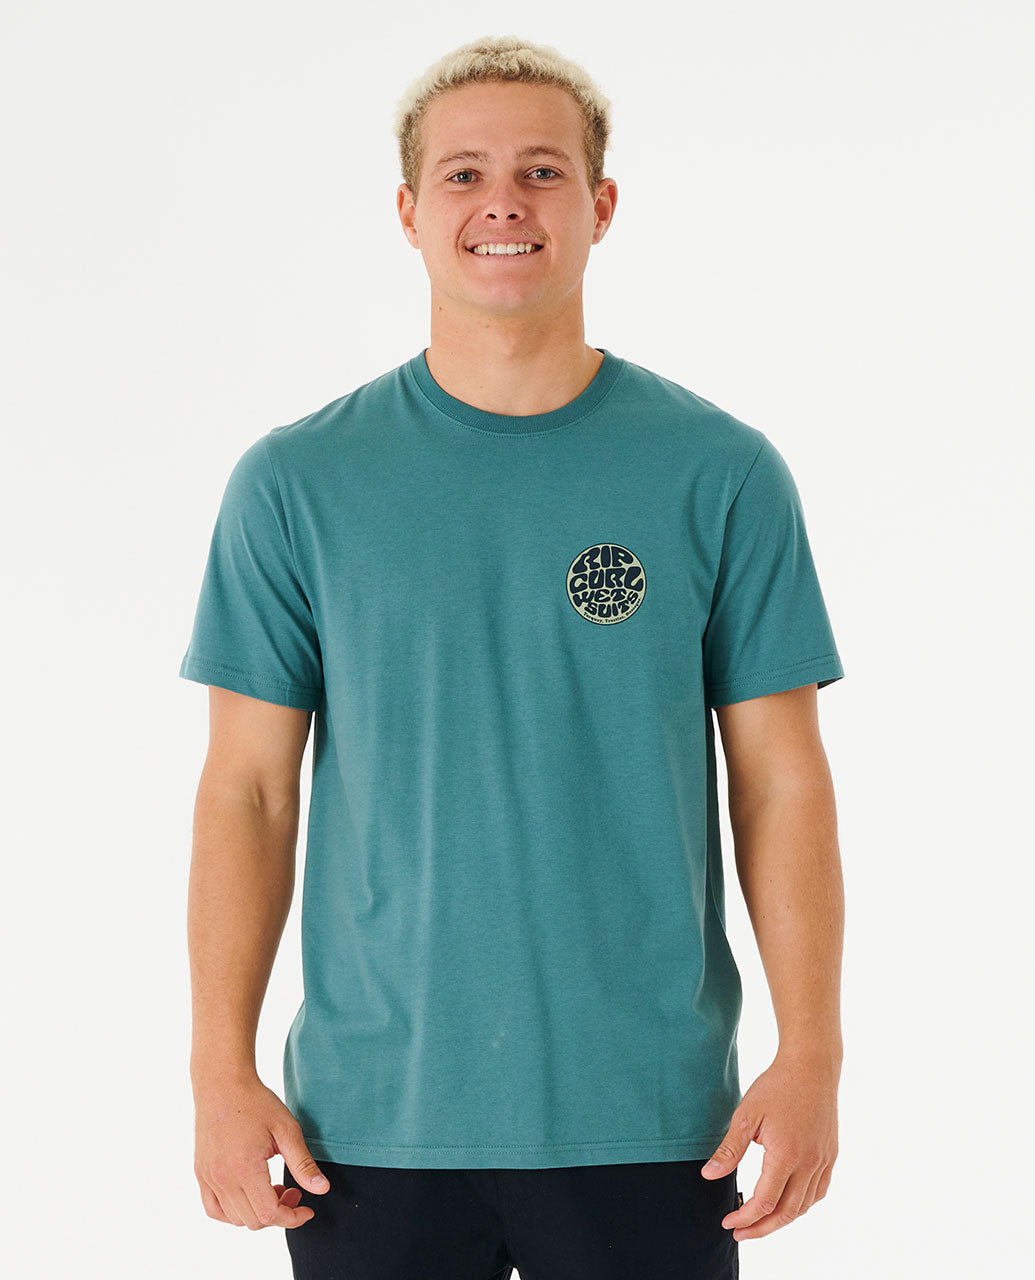 Wettie Essential Tee - Surf Clothing for mens – Rip Curl Indonesia